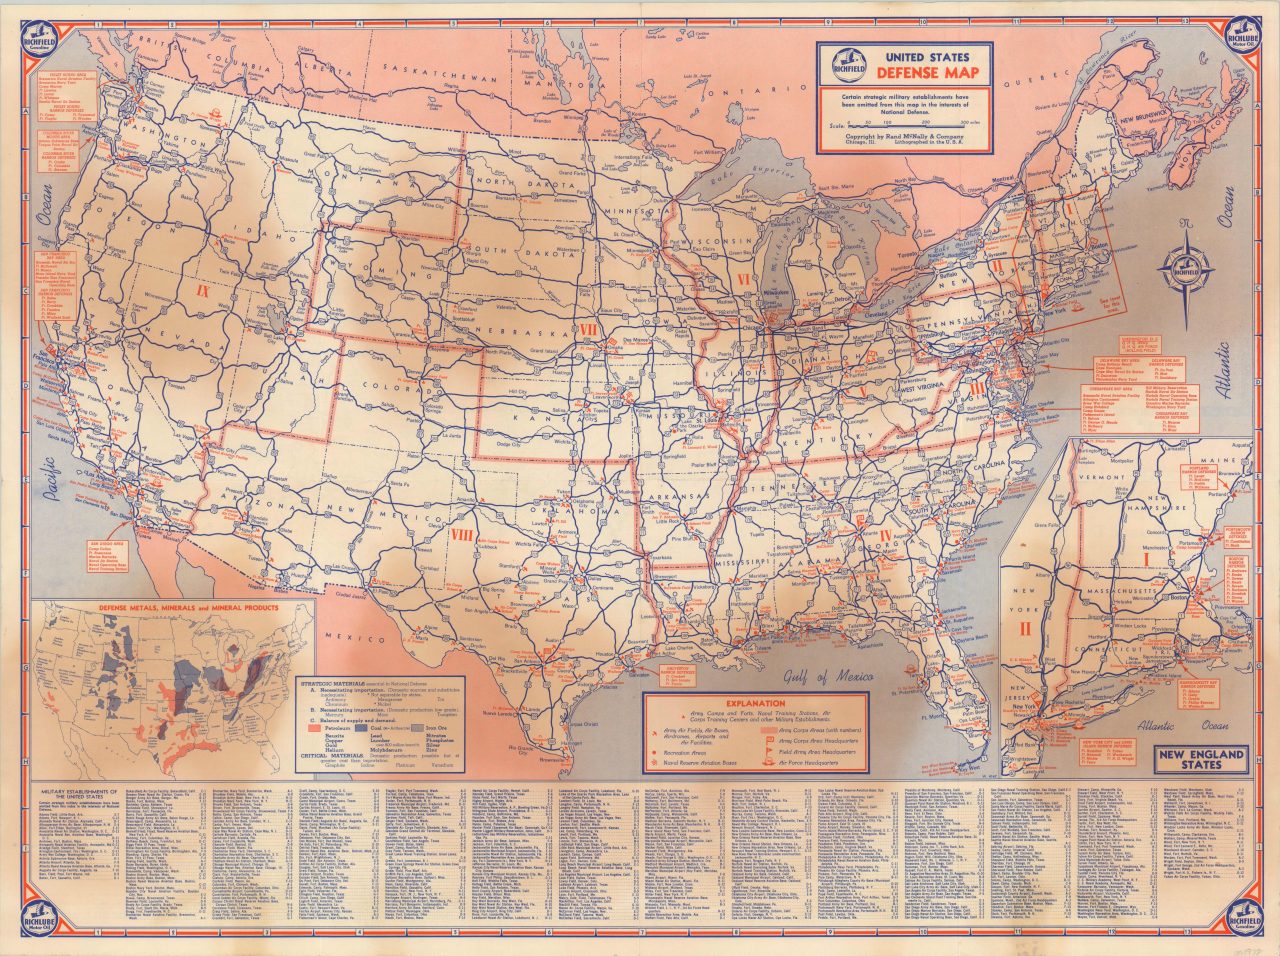 United States Defense Map | Curtis Wright Maps